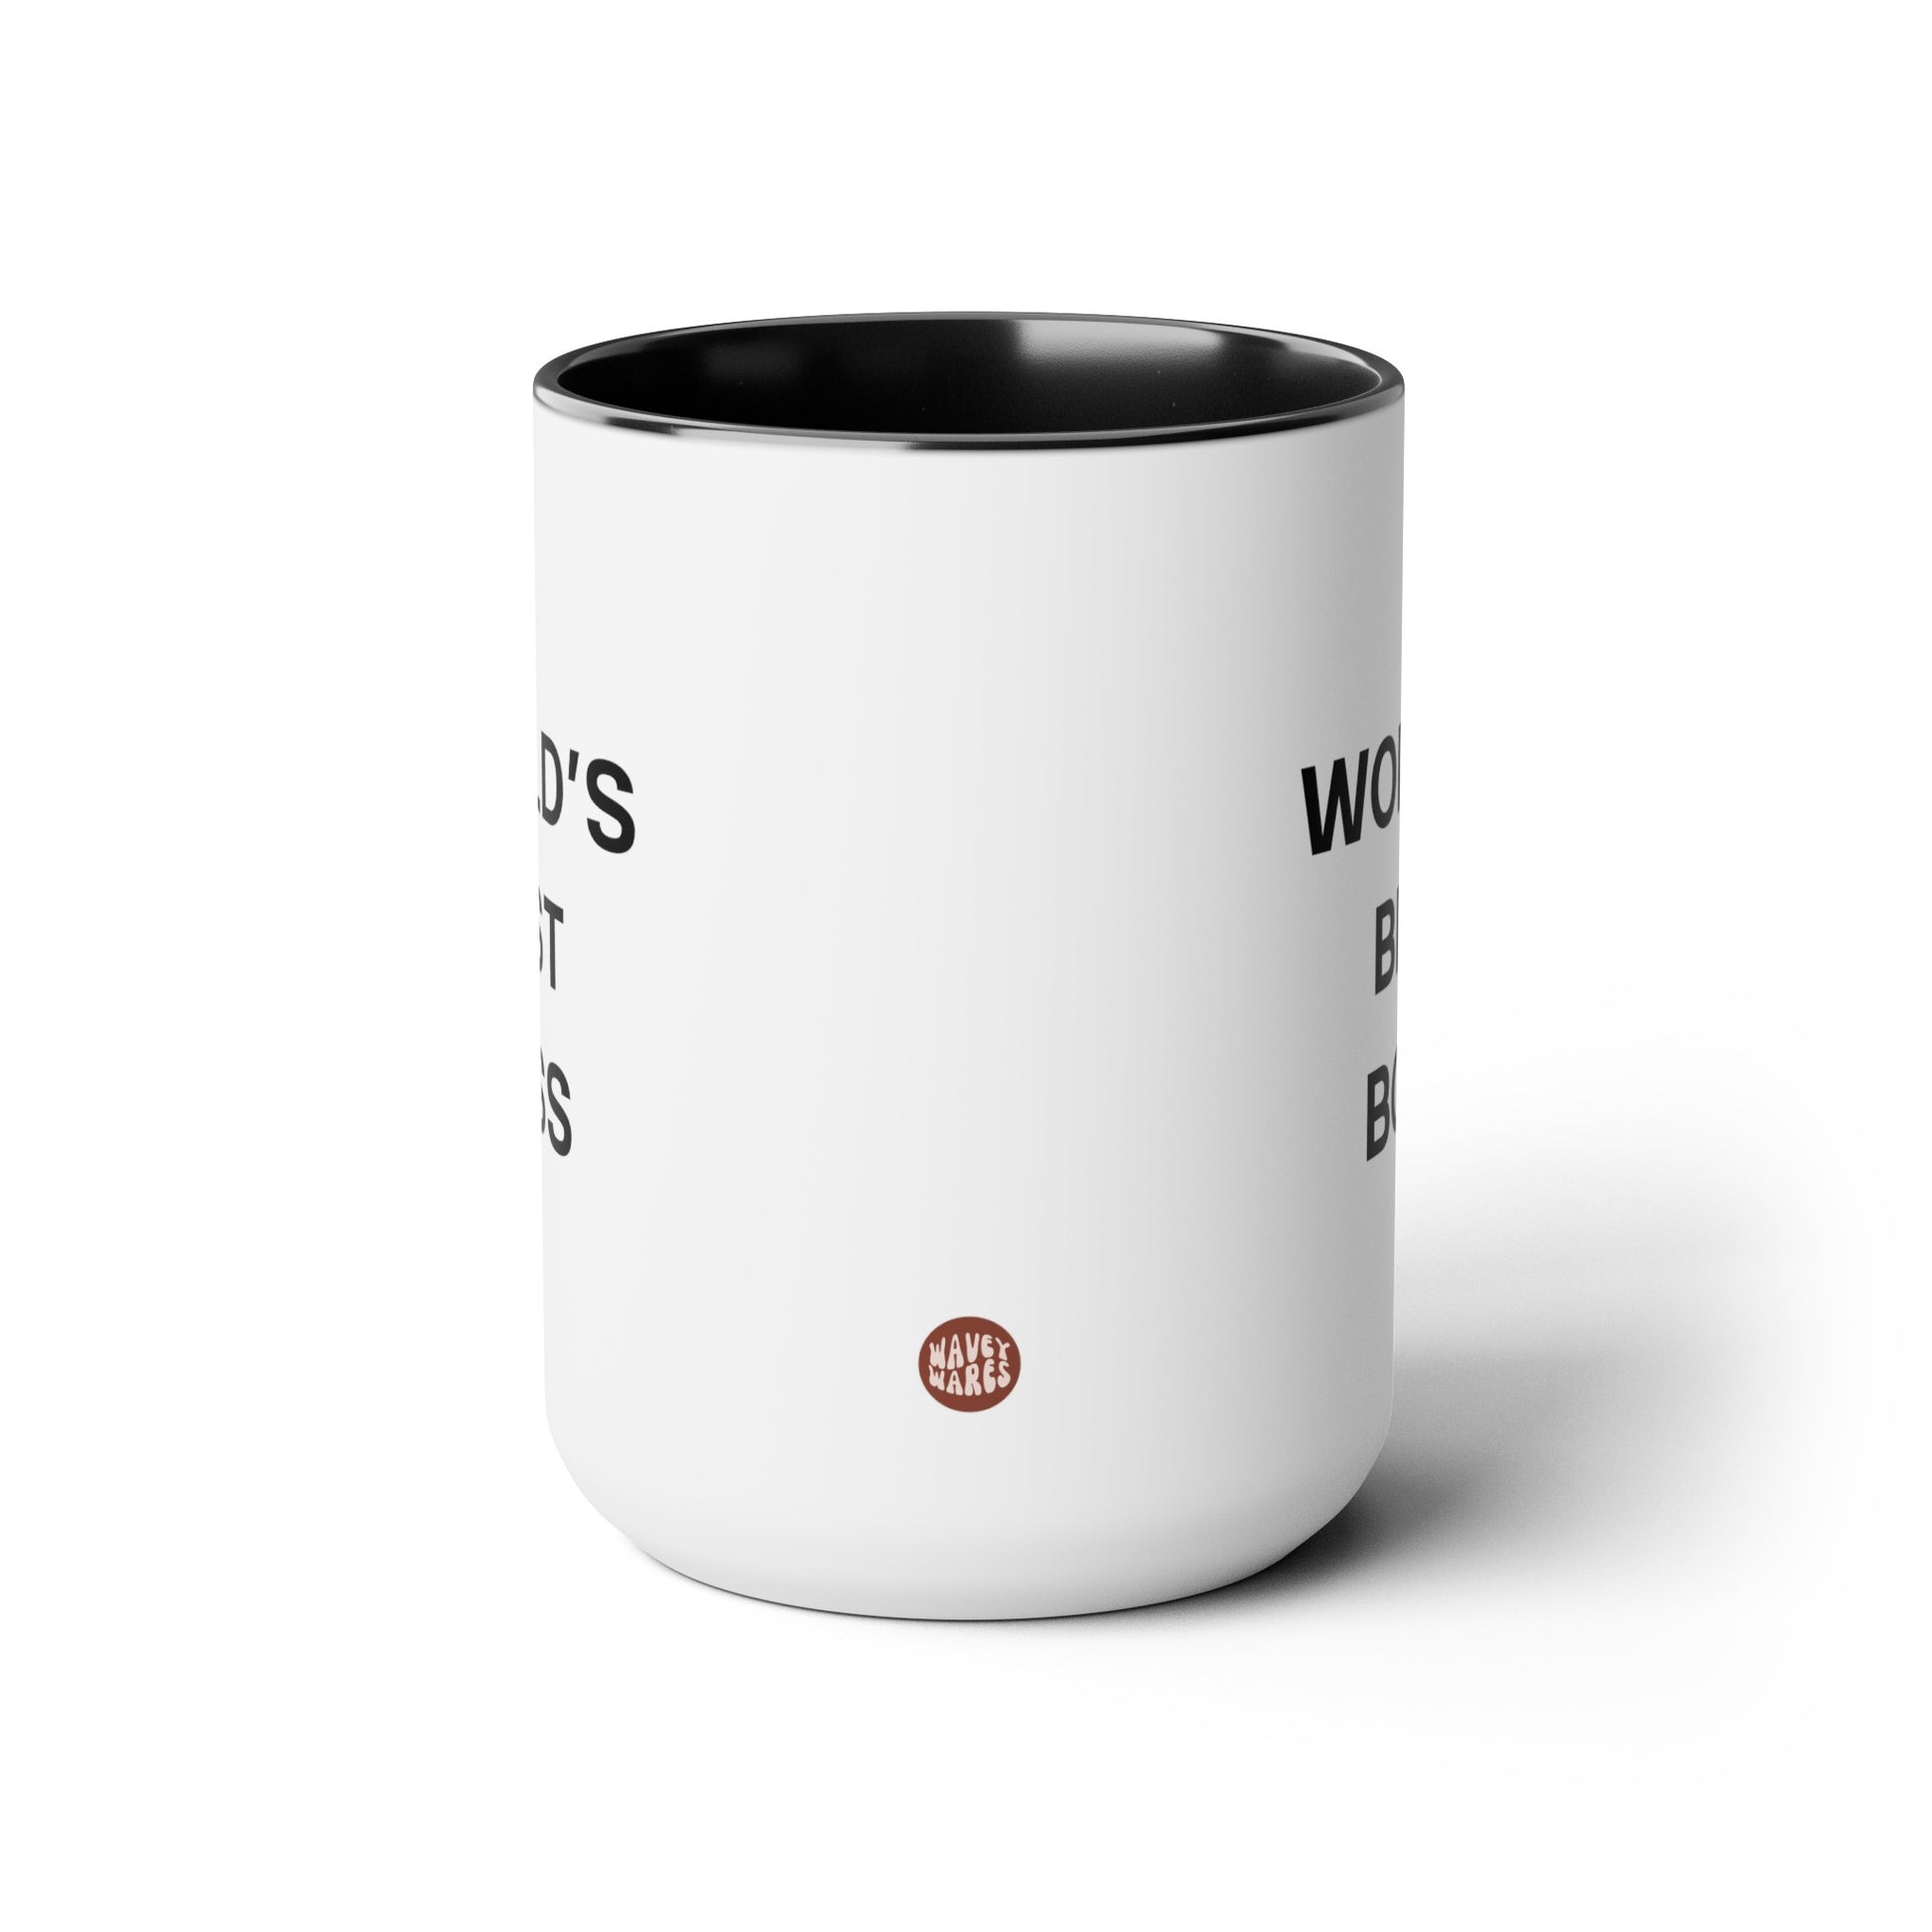 World's Best Boss 15oz white with black accent funny large coffee mug gift for coworker team leader manager office waveywares wavey wares wavywares wavy wares side